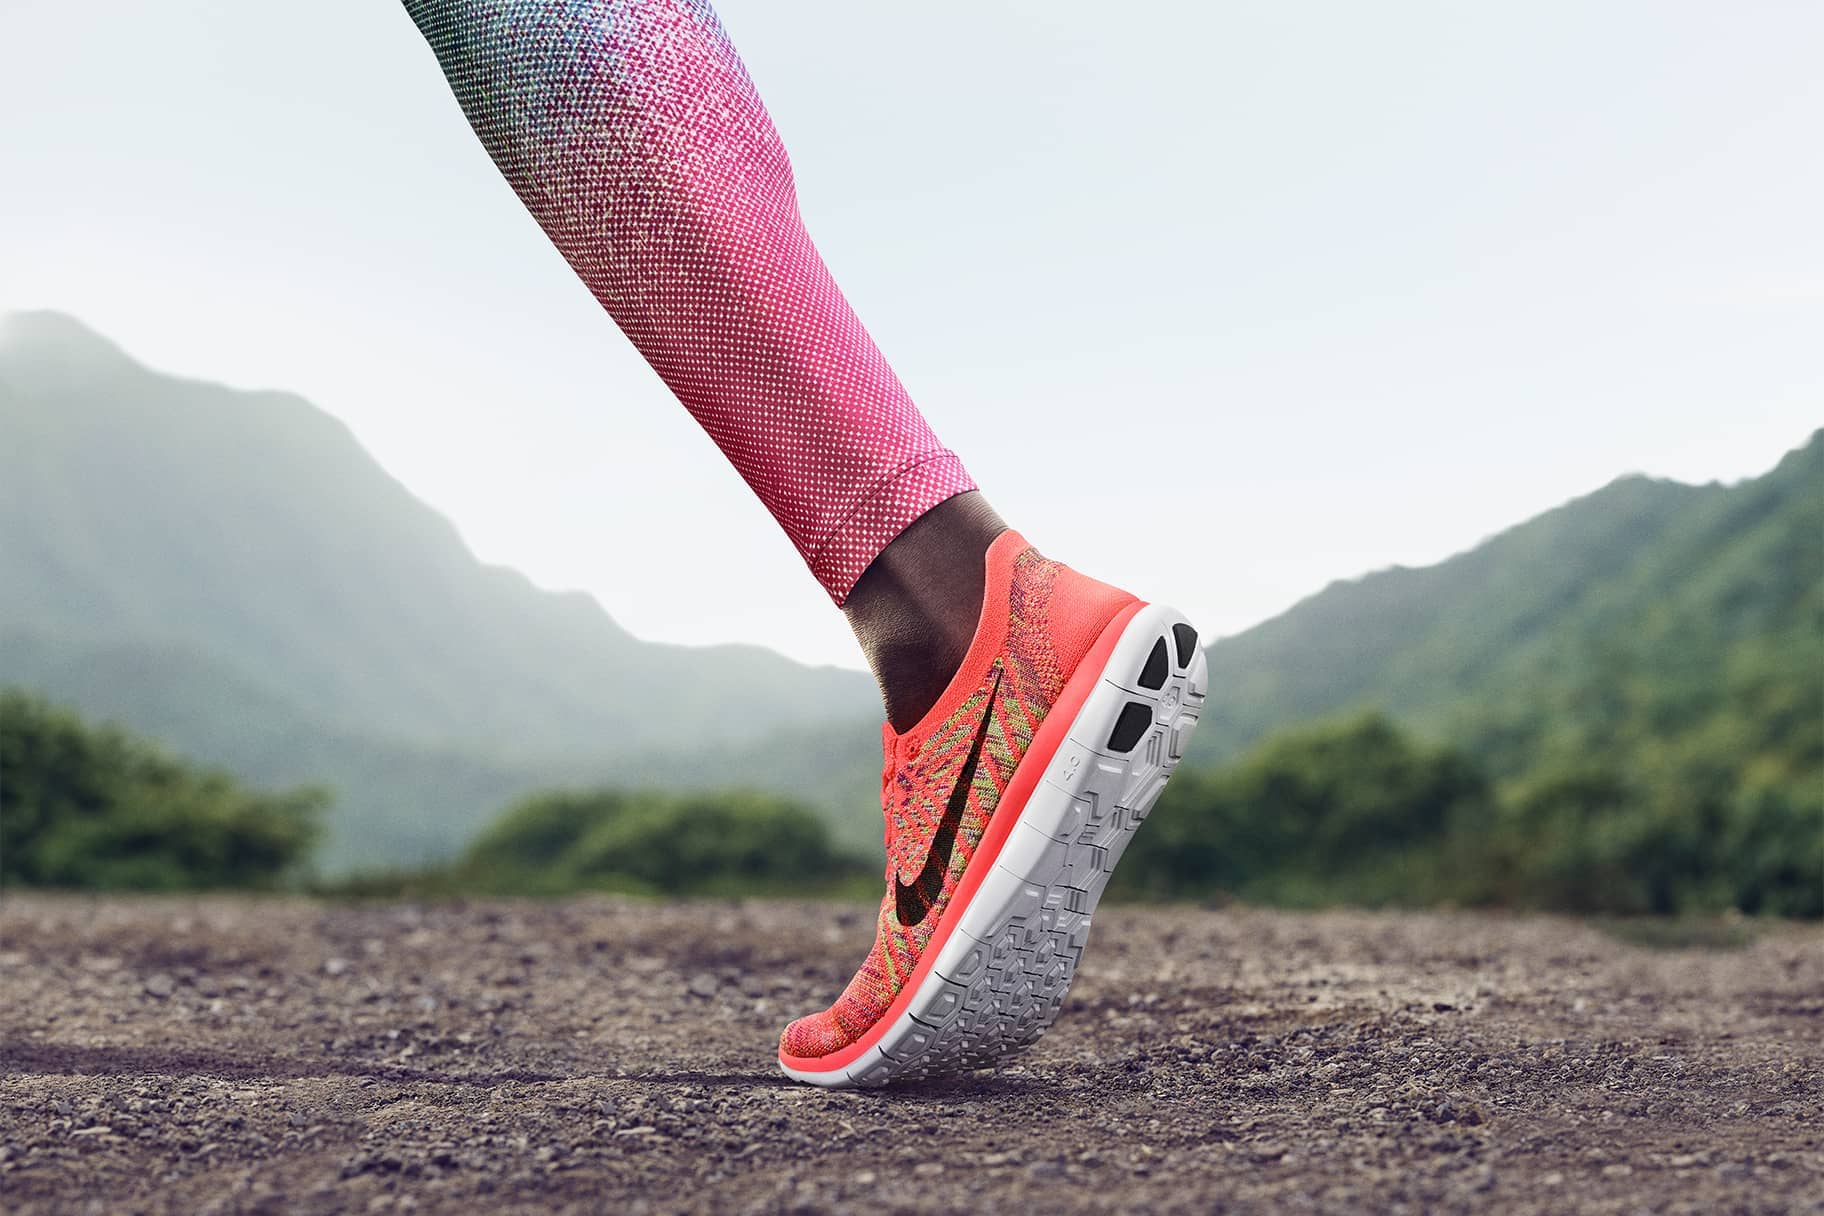 Tips for Buying Minimalist Barefoot Running Shoes. Nike.com